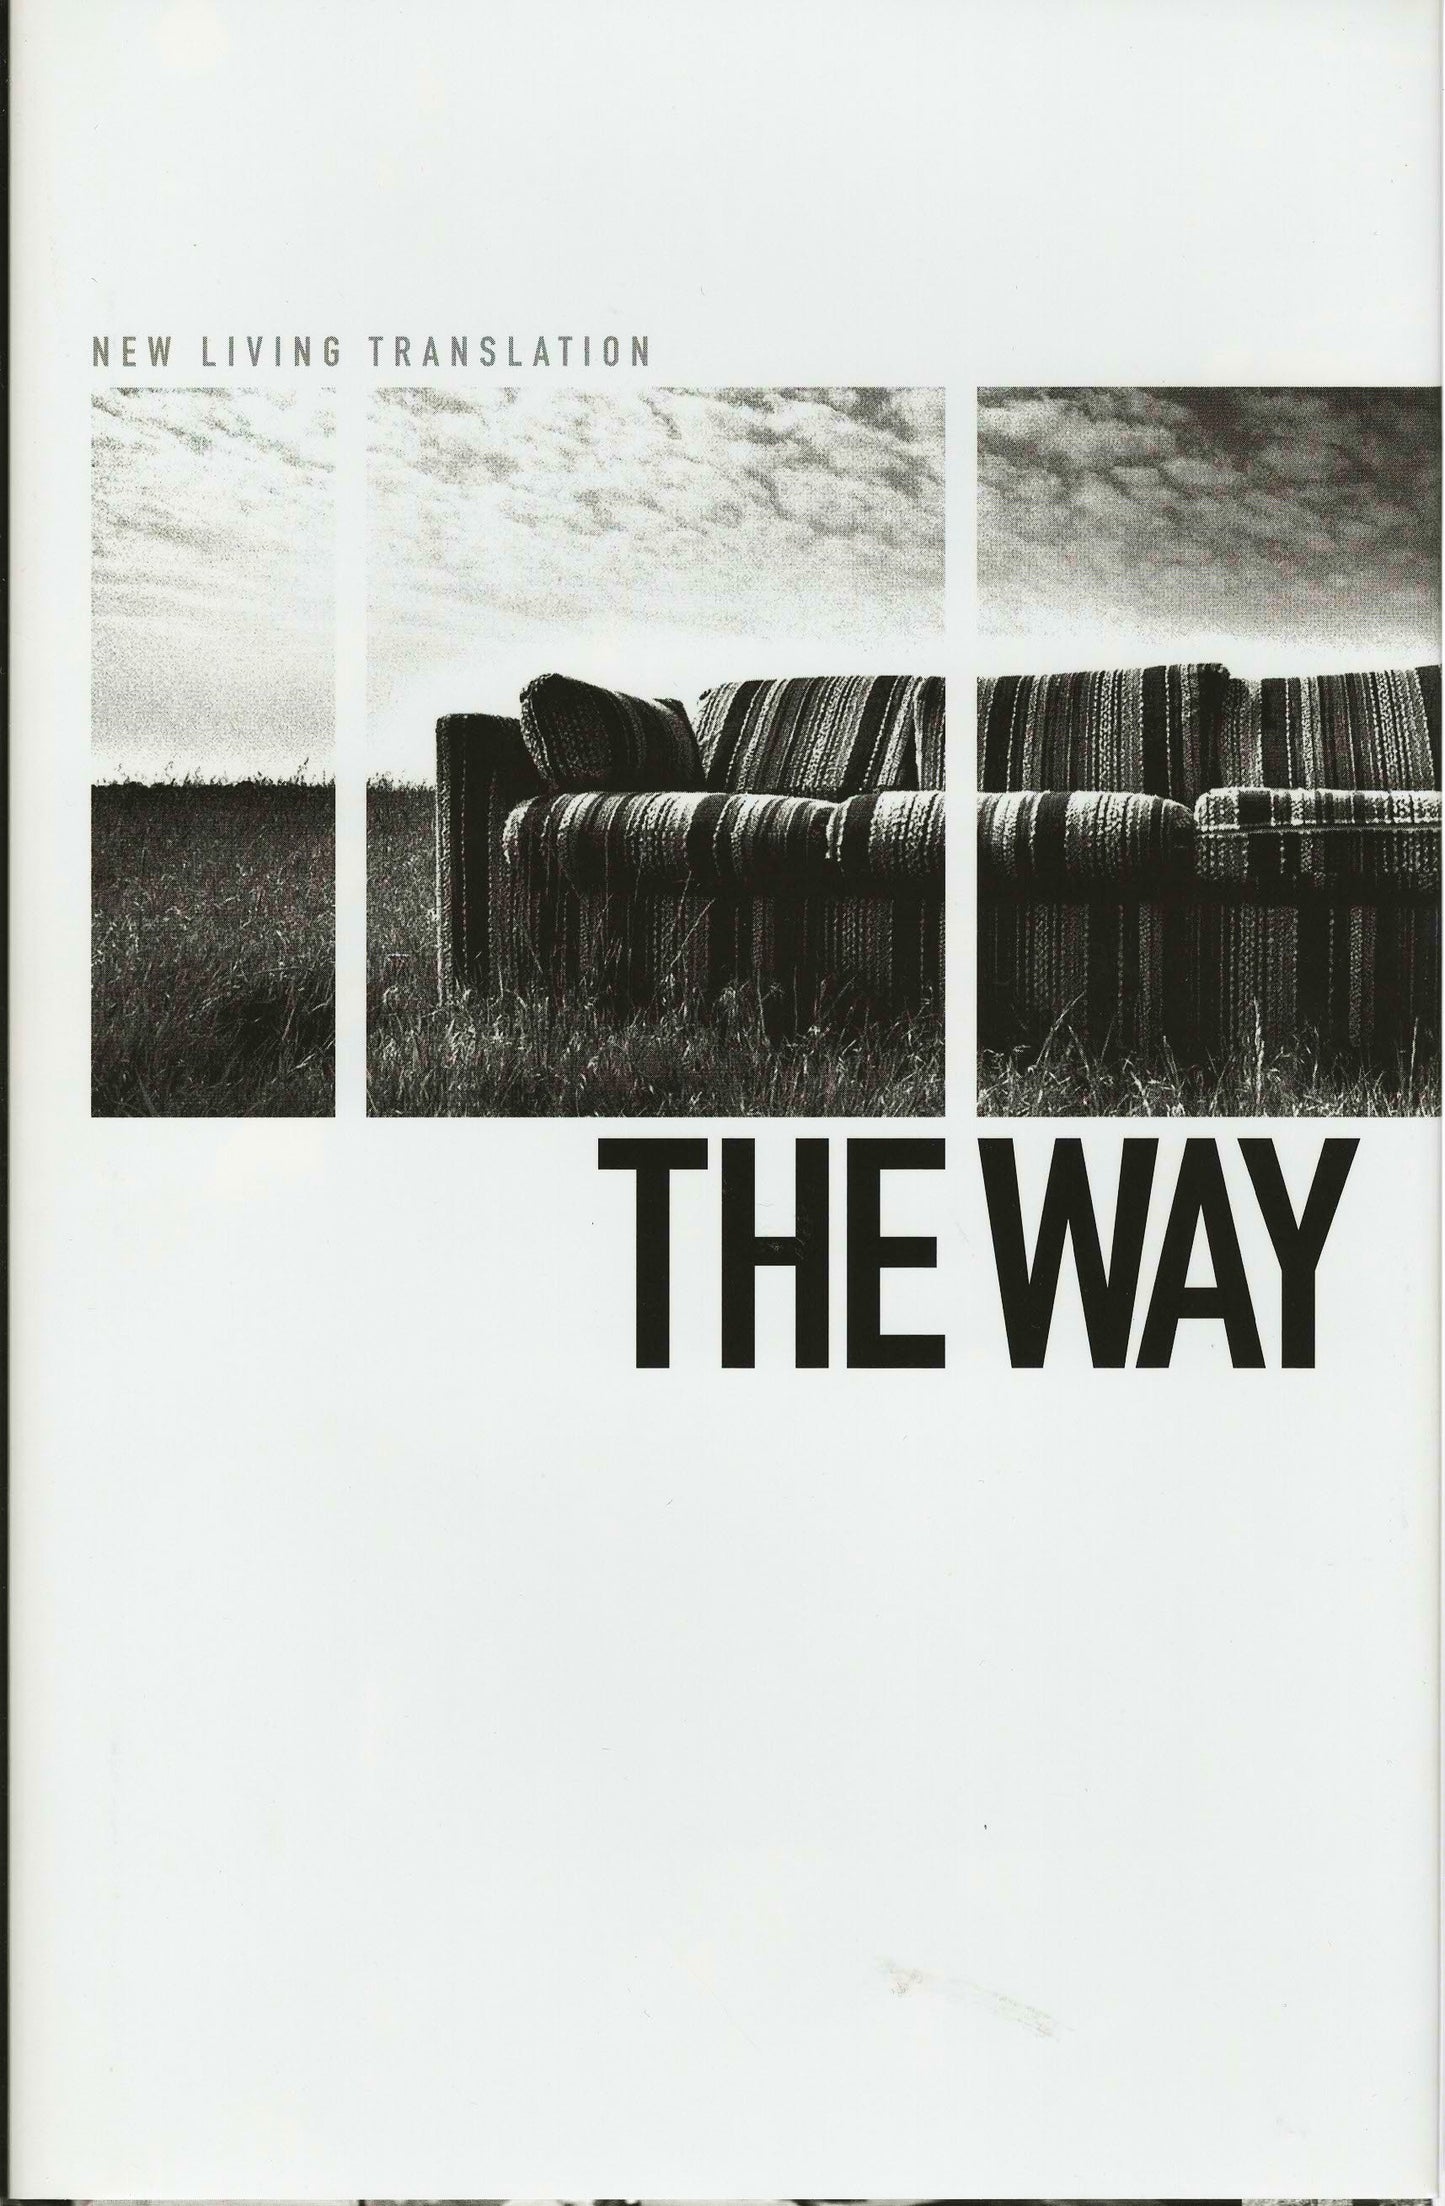 Tyndale NLT The Way - Hardcover w/Dust Jacket and Protective Sleeve